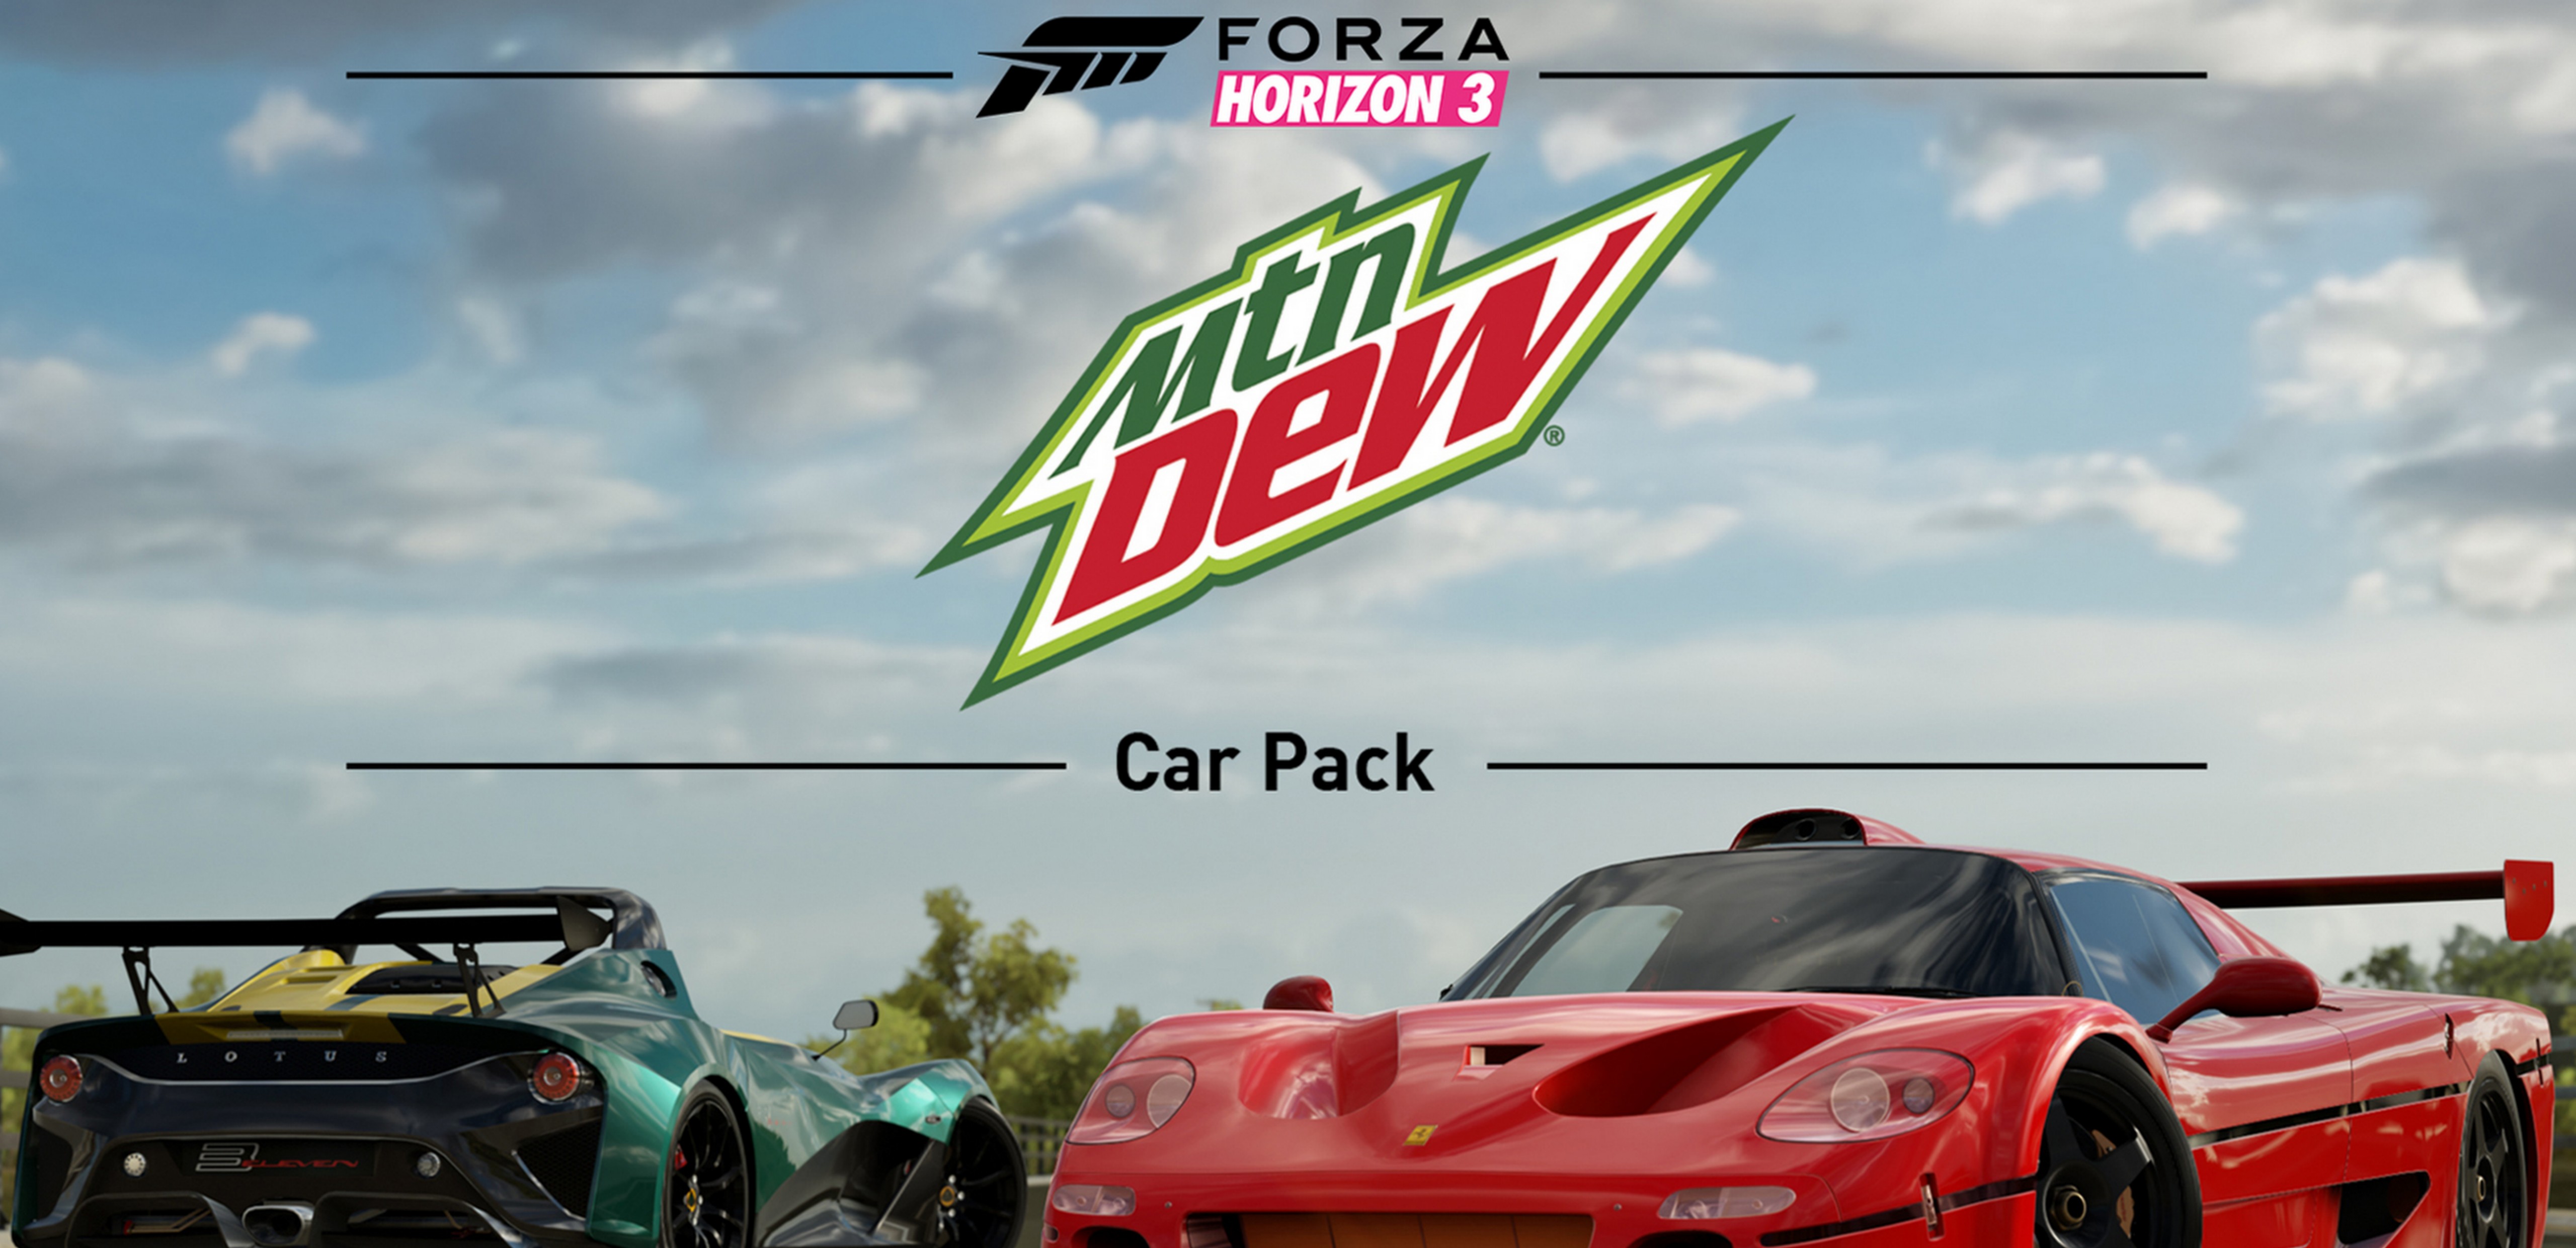 The Mountain Dew Car Pack for Forza Horizon 3 arrives tomorrow!